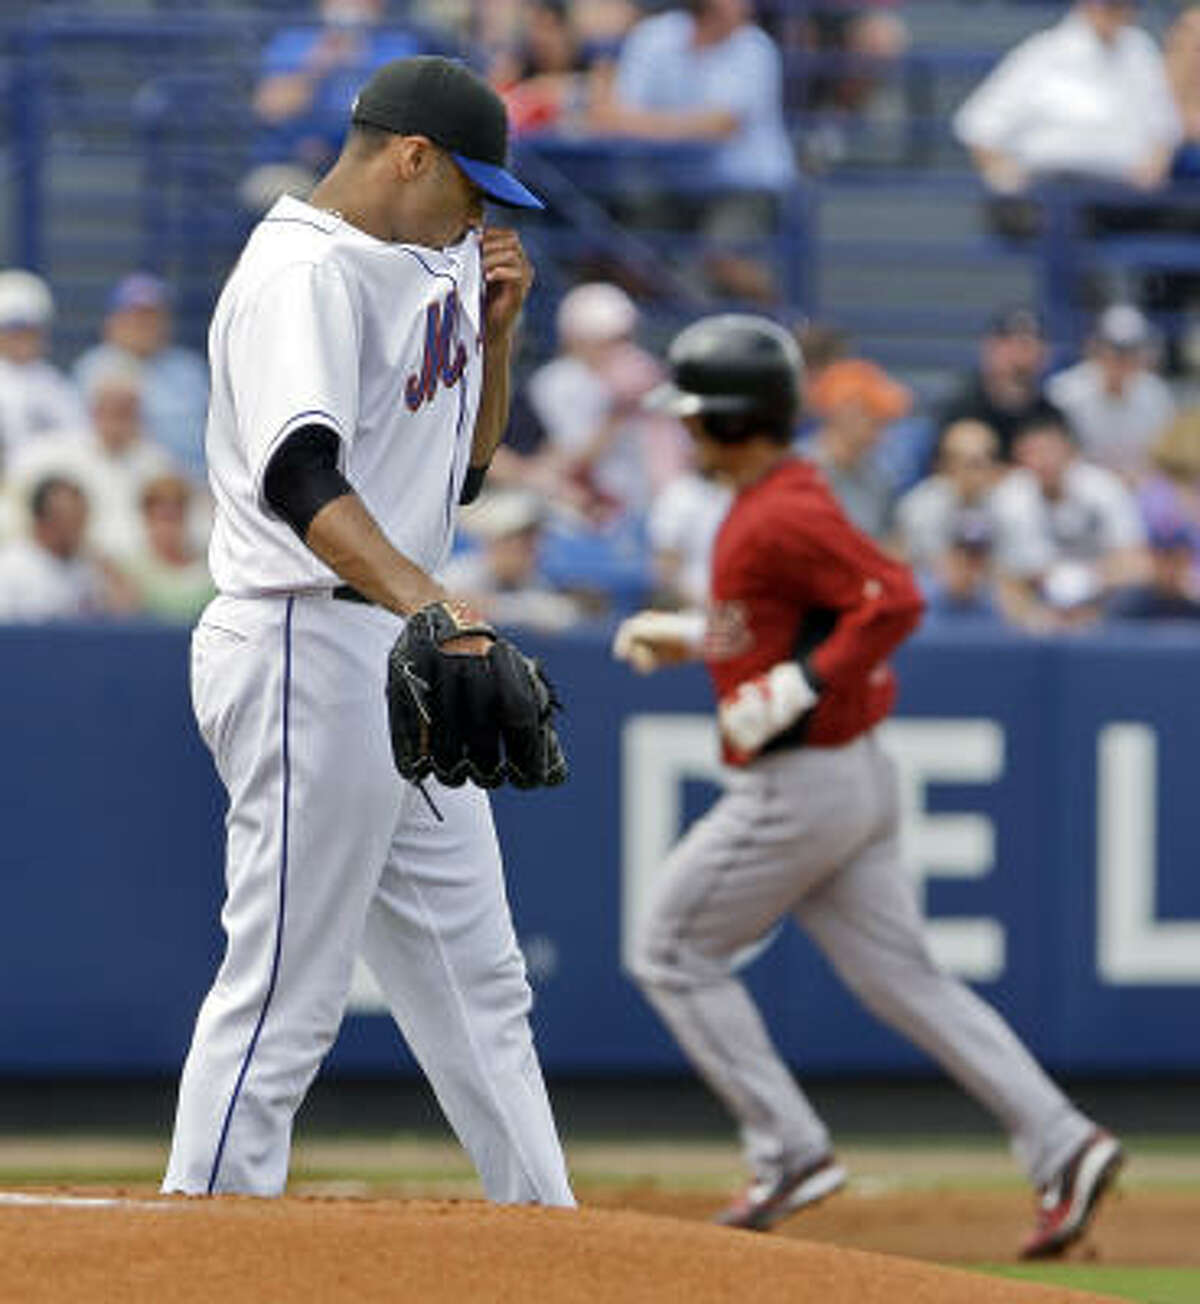 Kaz Matsui rounds the bases after hitting a solo home run off Johan Santana in the first inning. Matsui went 2 for 2.